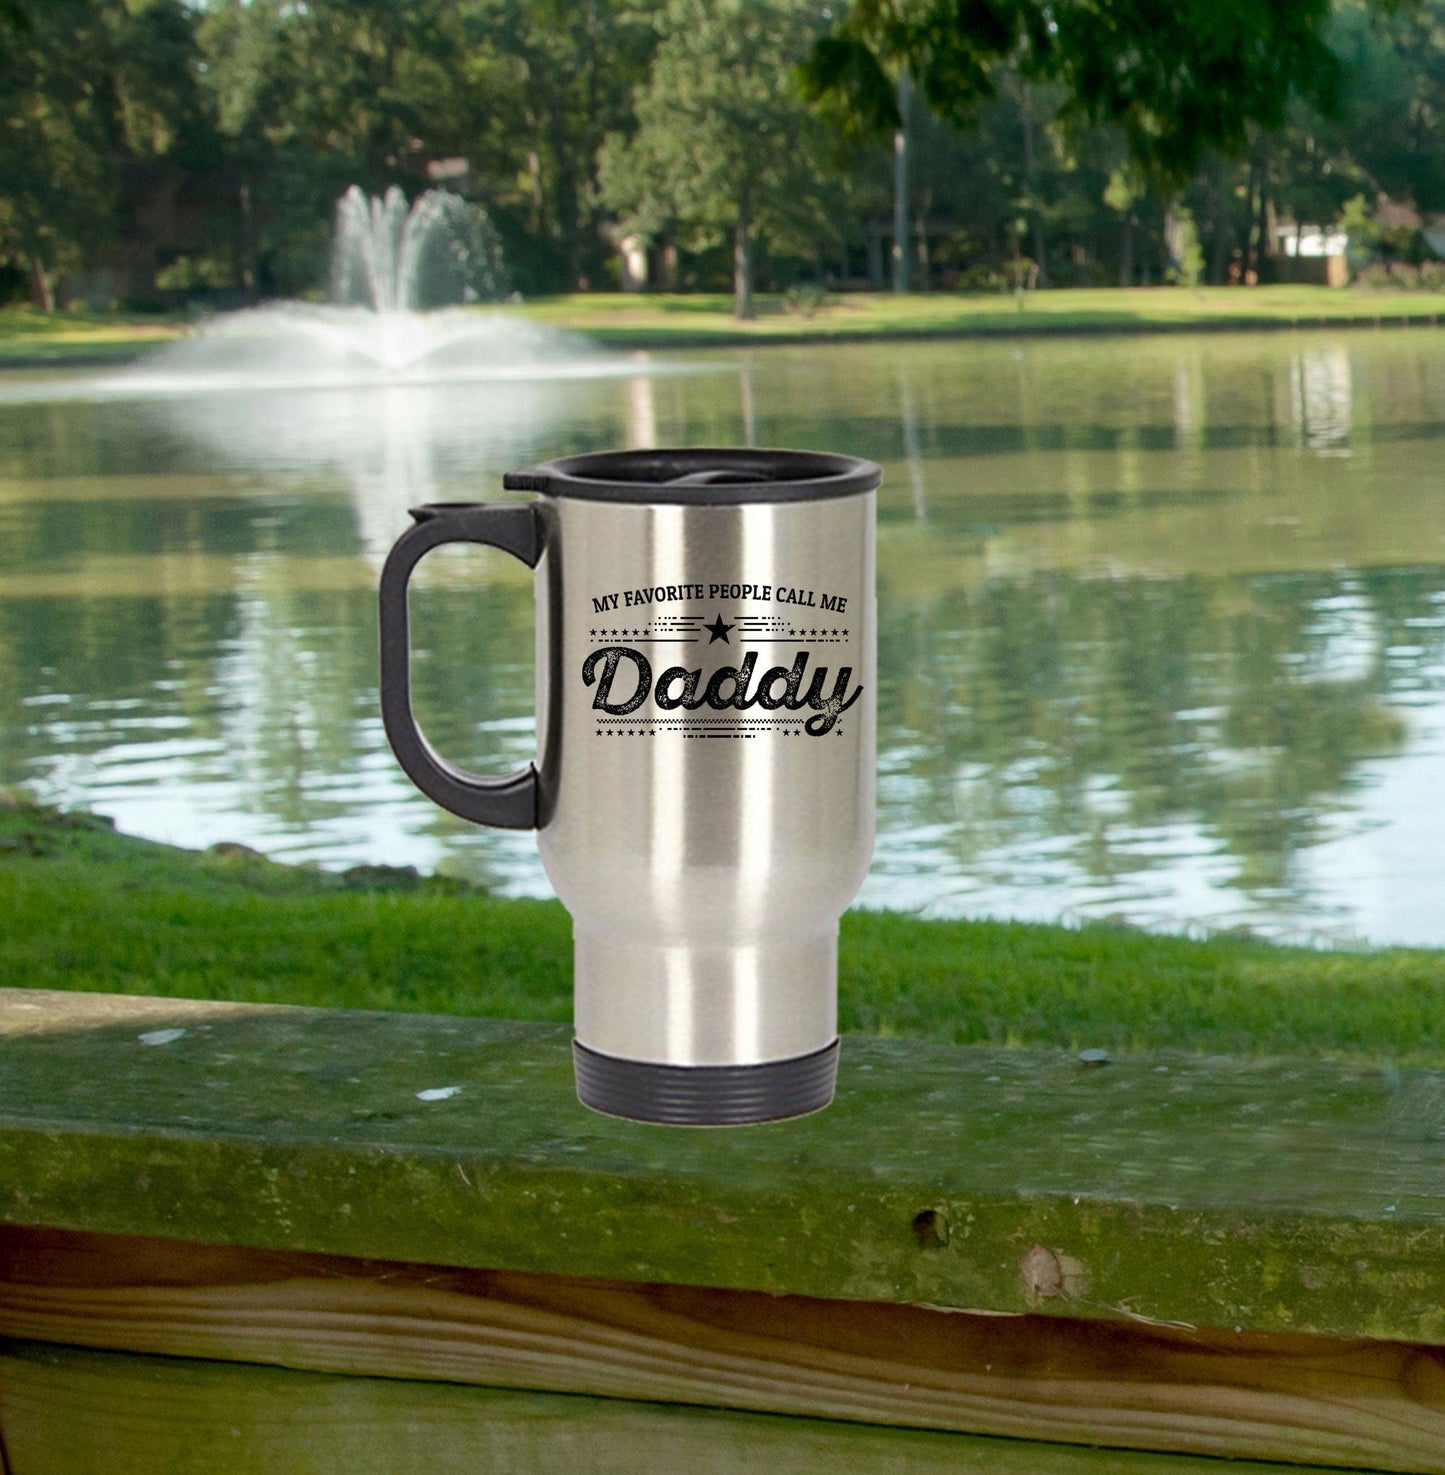 Favorite Daddy Travel Mug - Gift for Father's Day